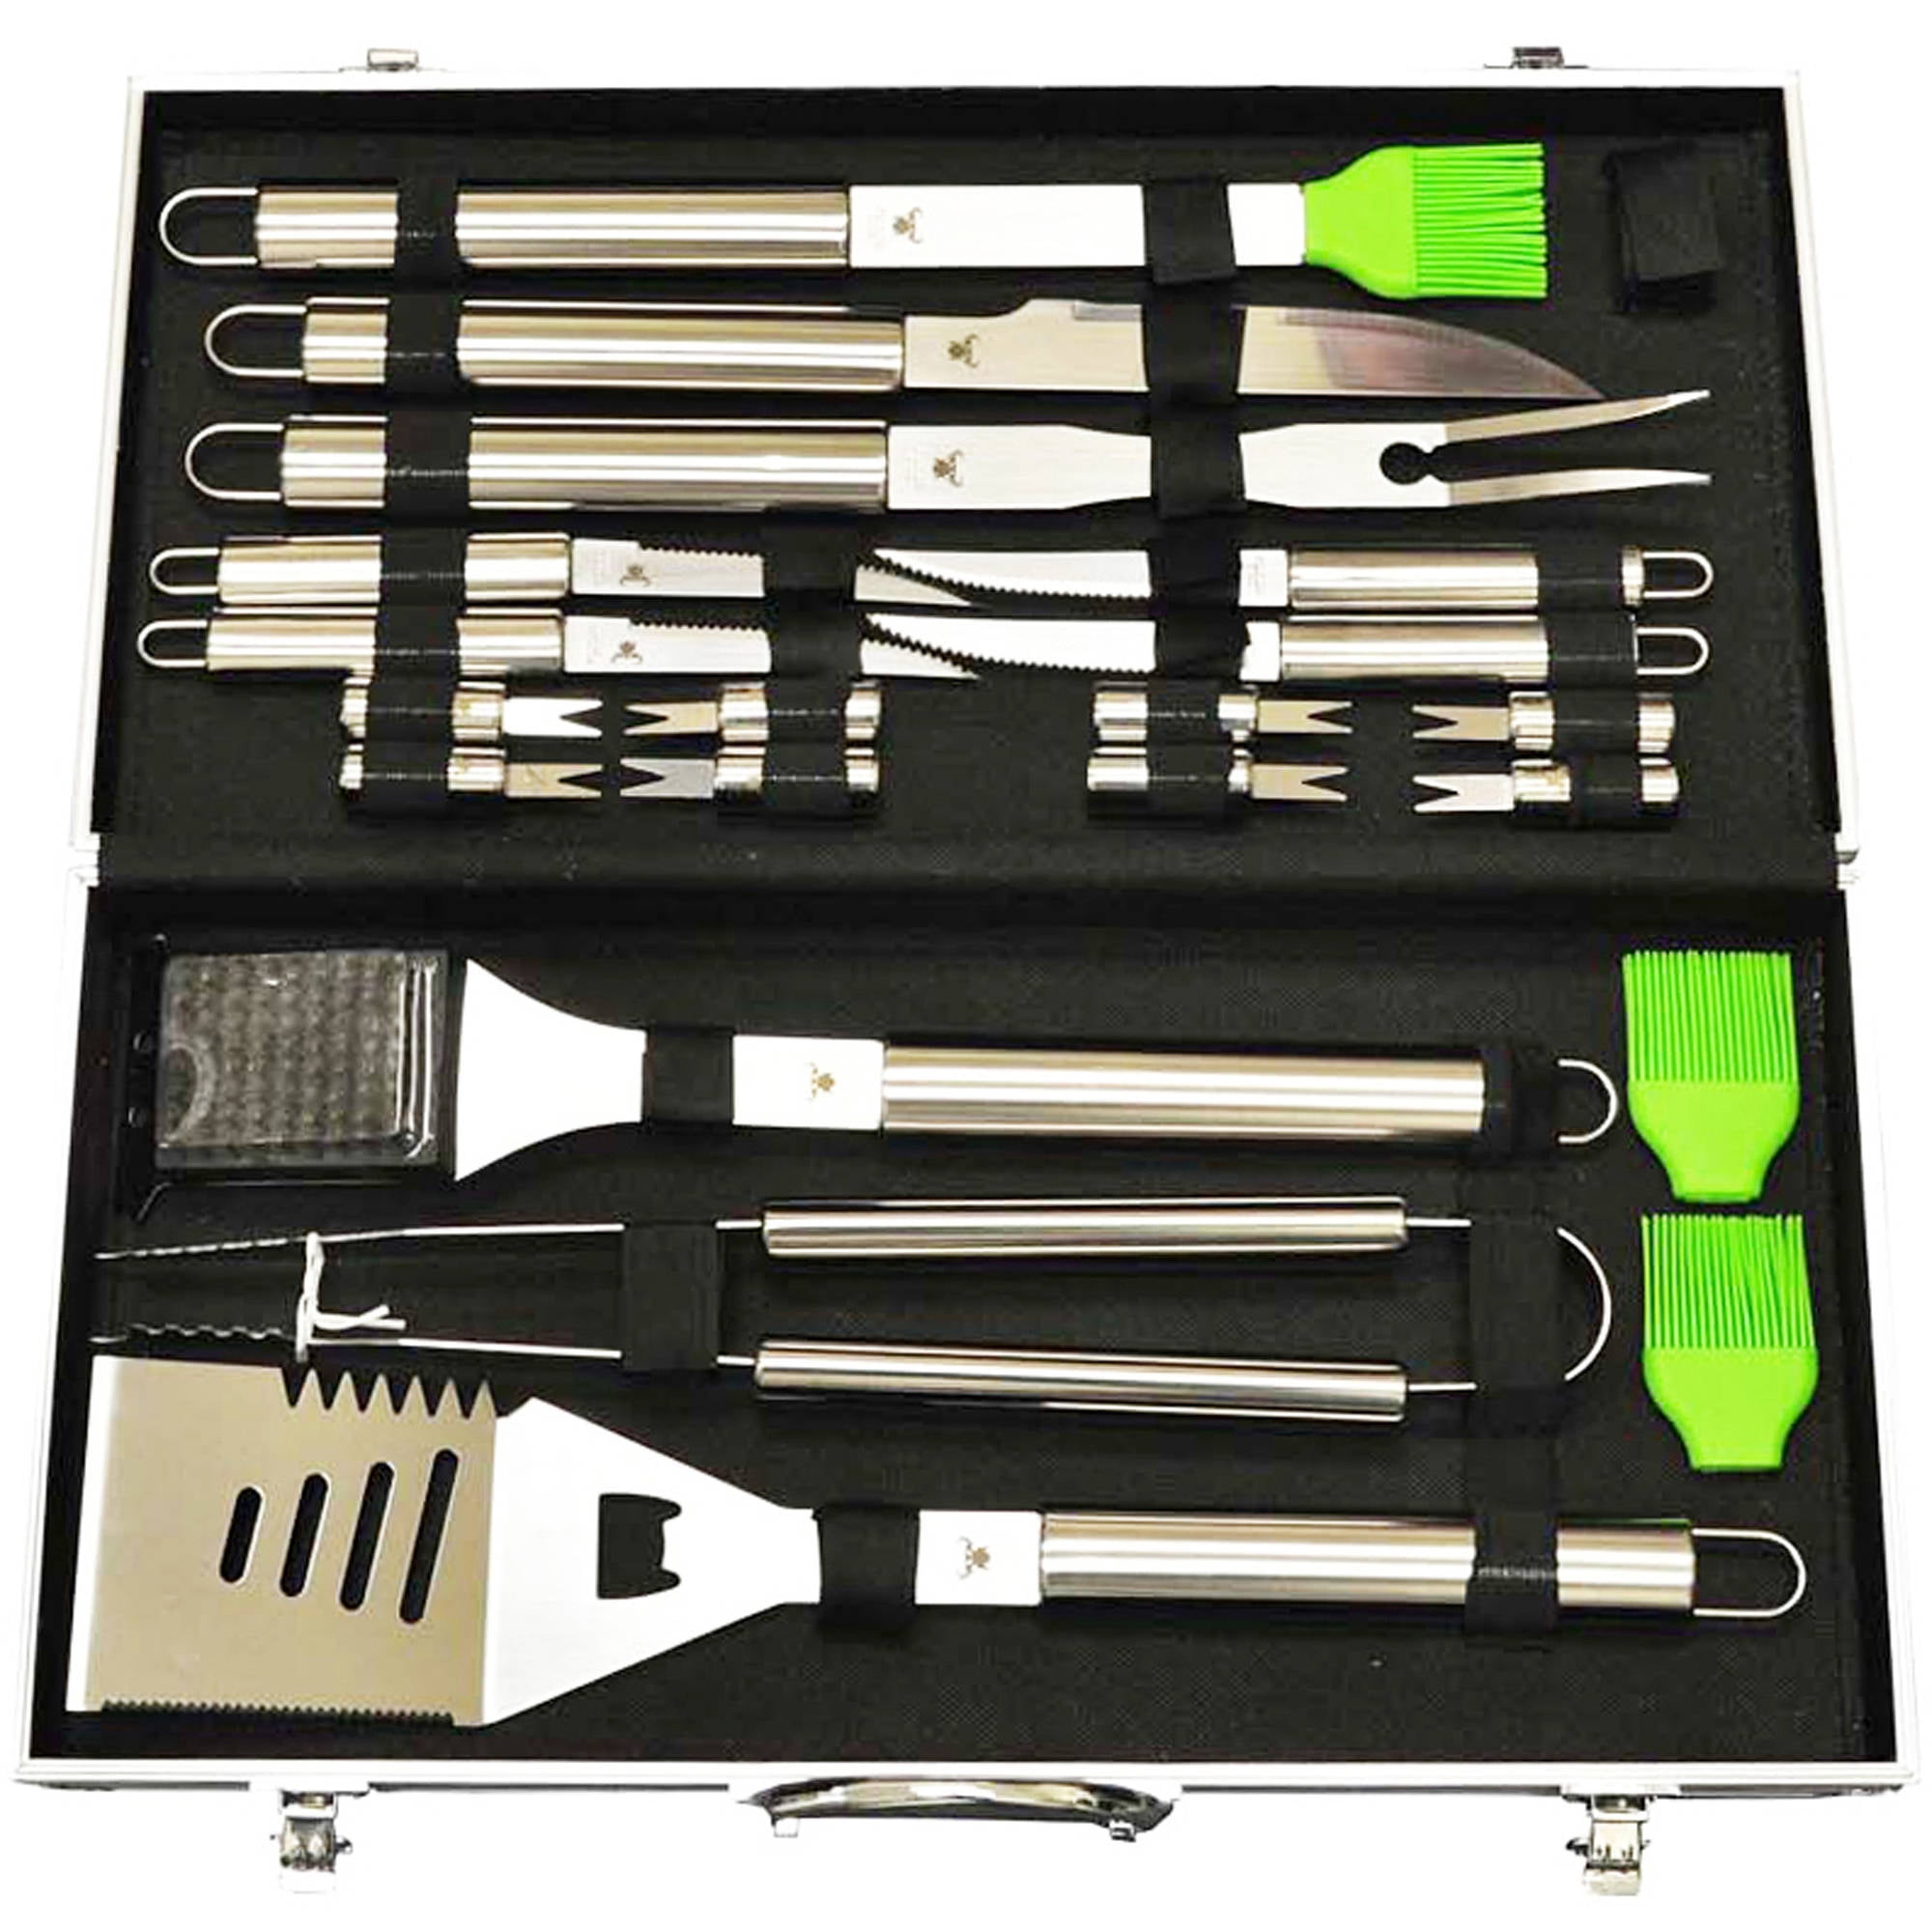 GCP Products GCP-US-578468 Grill Set, Grill Tools, Grill Bbq Accessories,  Grilling Gifts For Men, 34Pcs Bbq Tools For Outdoor Grill With Aluminum  Case, …